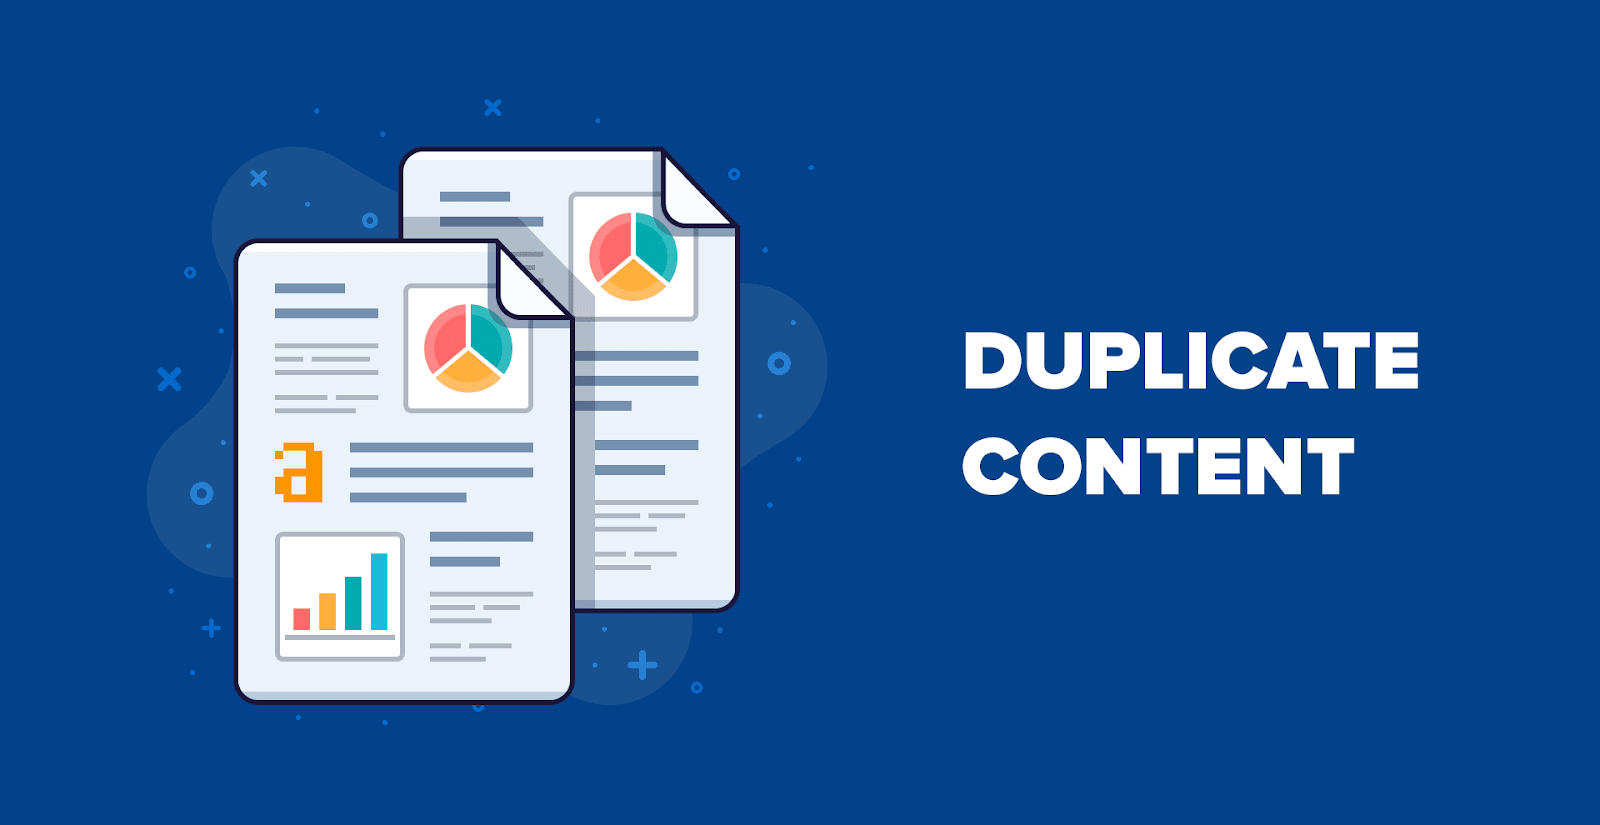 Duplicate Content: Why It Happens and How to Fix It